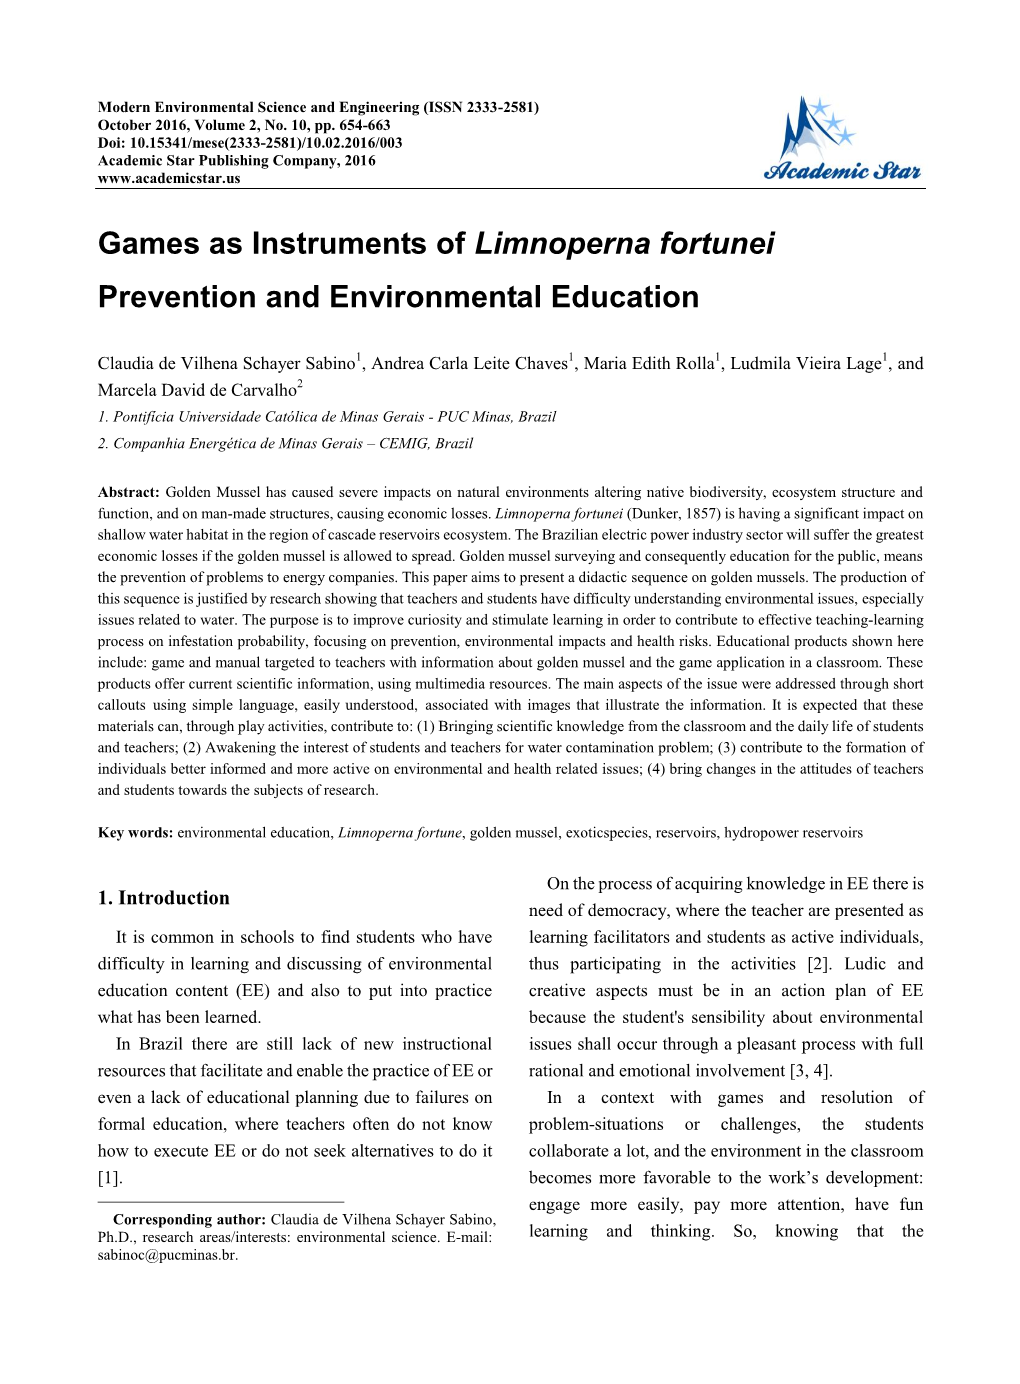 Games As Instruments of Limnoperna Fortunei Prevention and Environmental Education